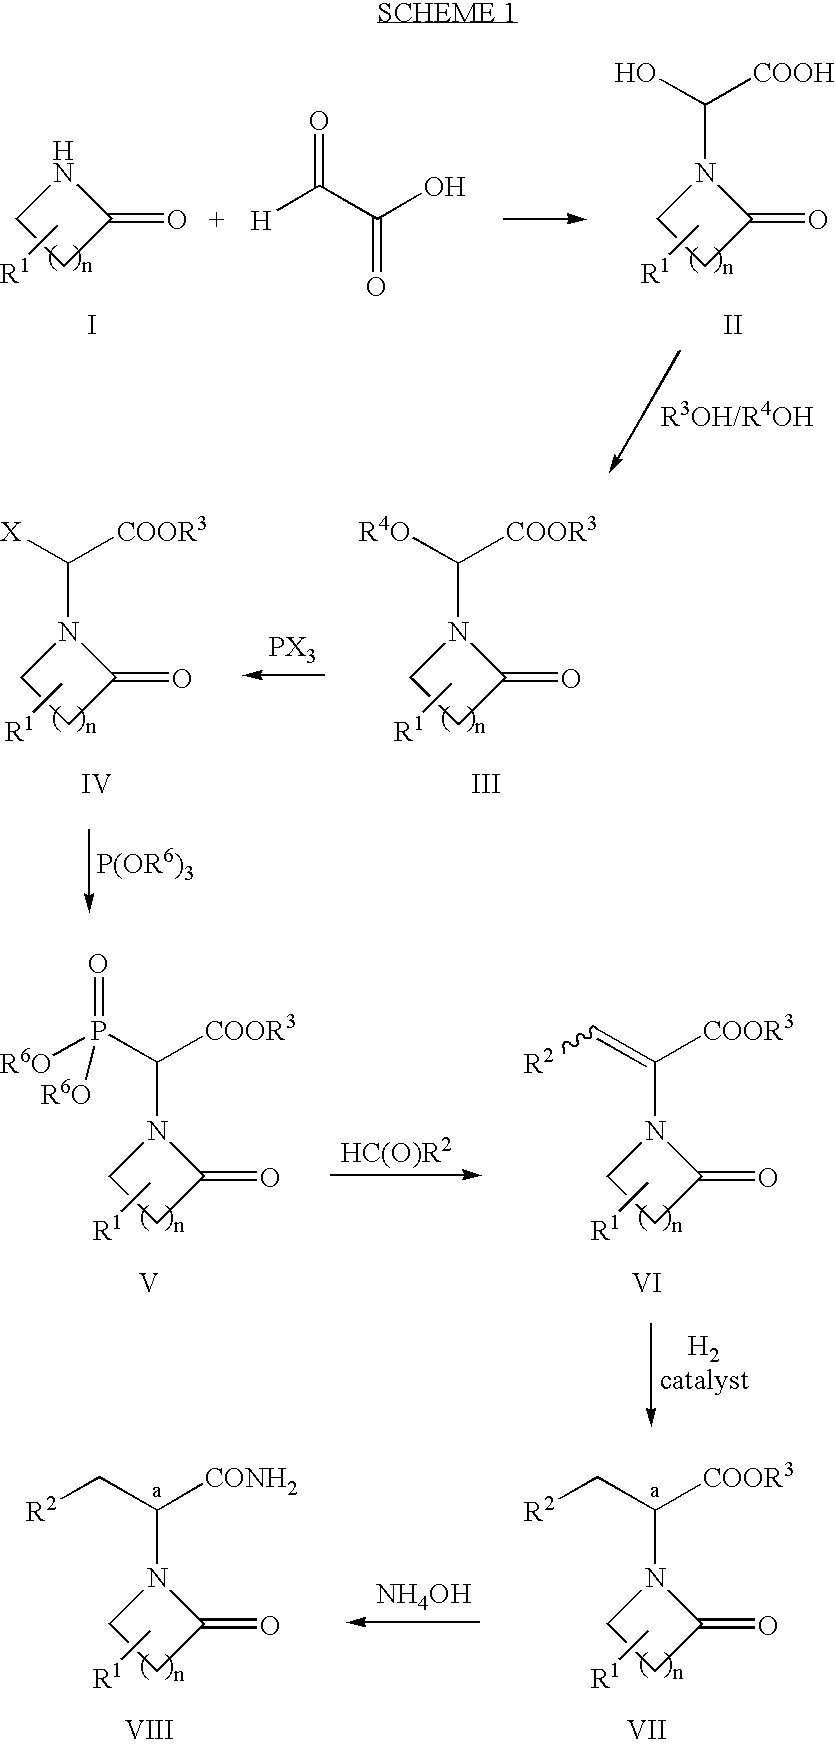 Highly enantiomerically pure lactam-substituted propanoic acid derivatives and methods of making and using same